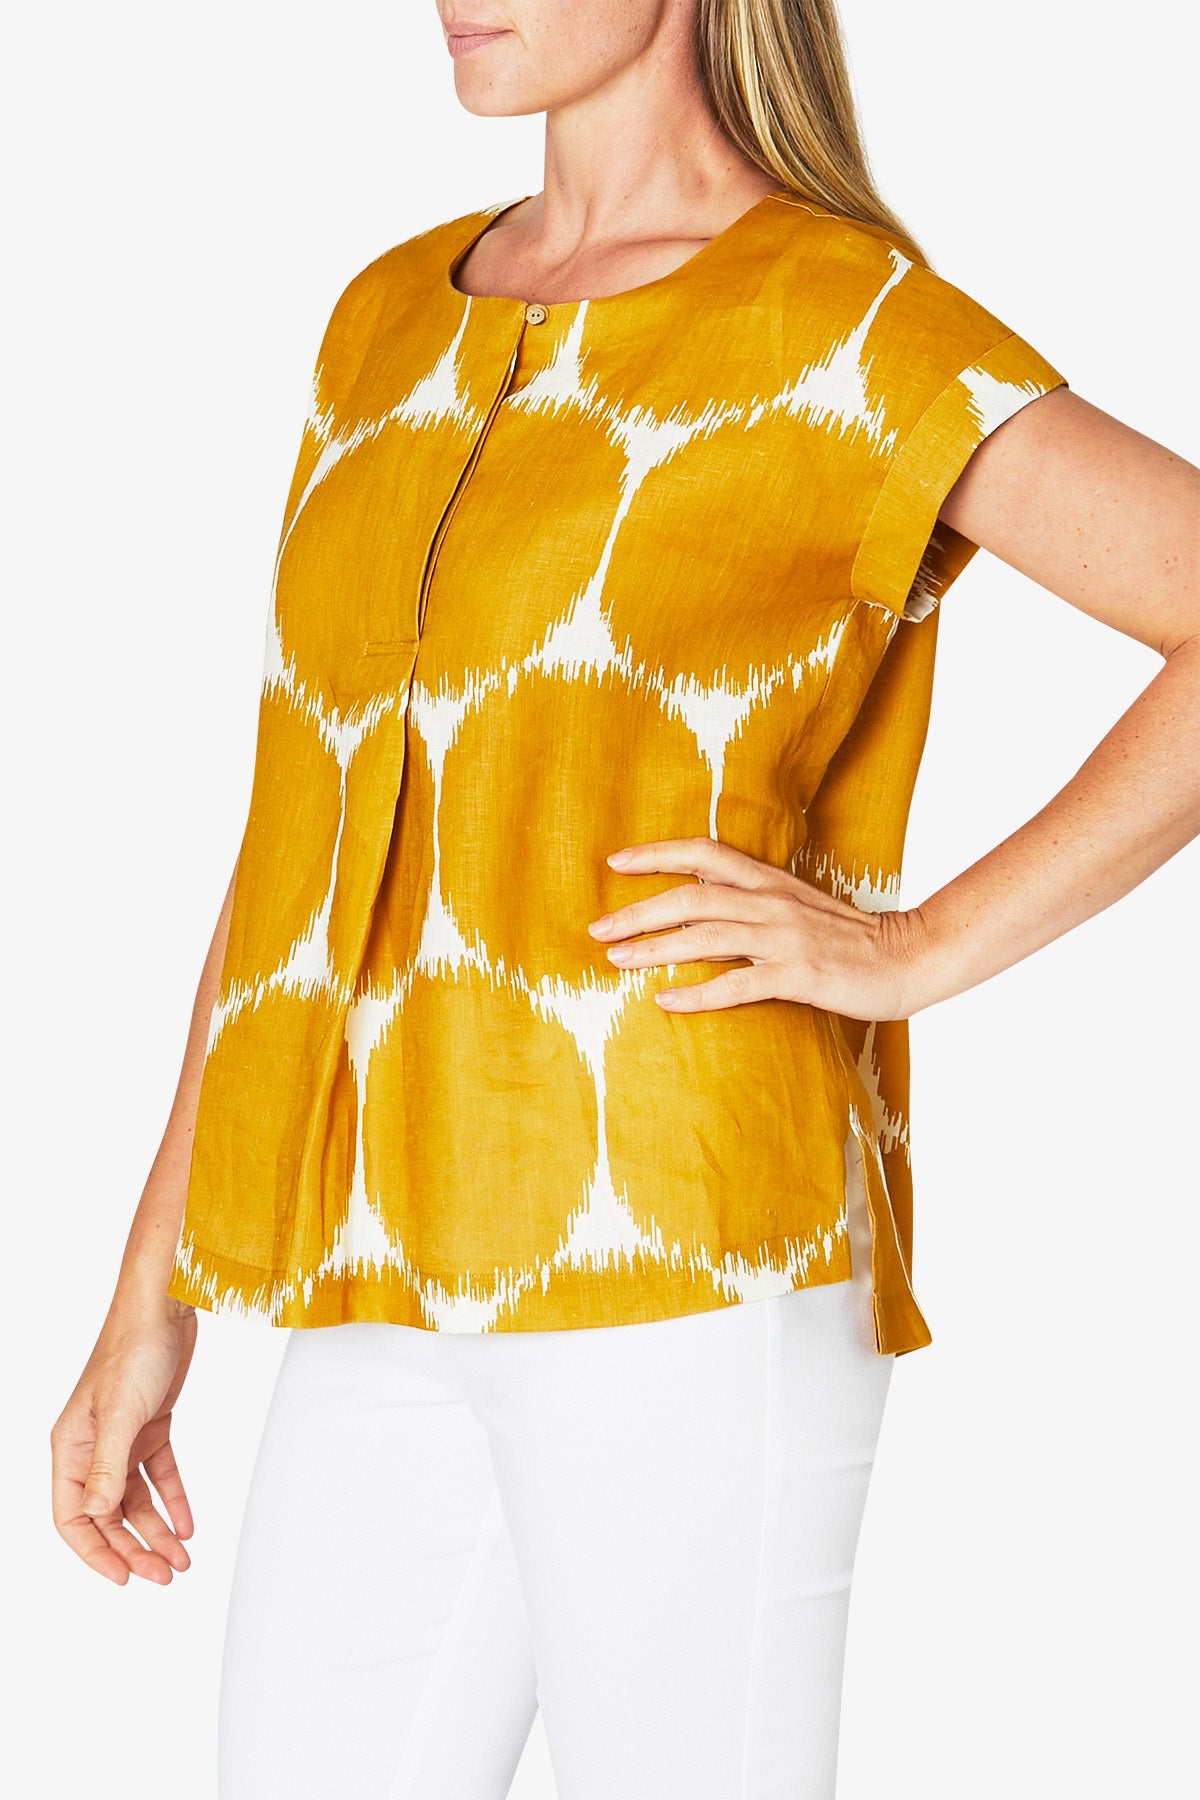 Abstract Spot Print Top Old Gold